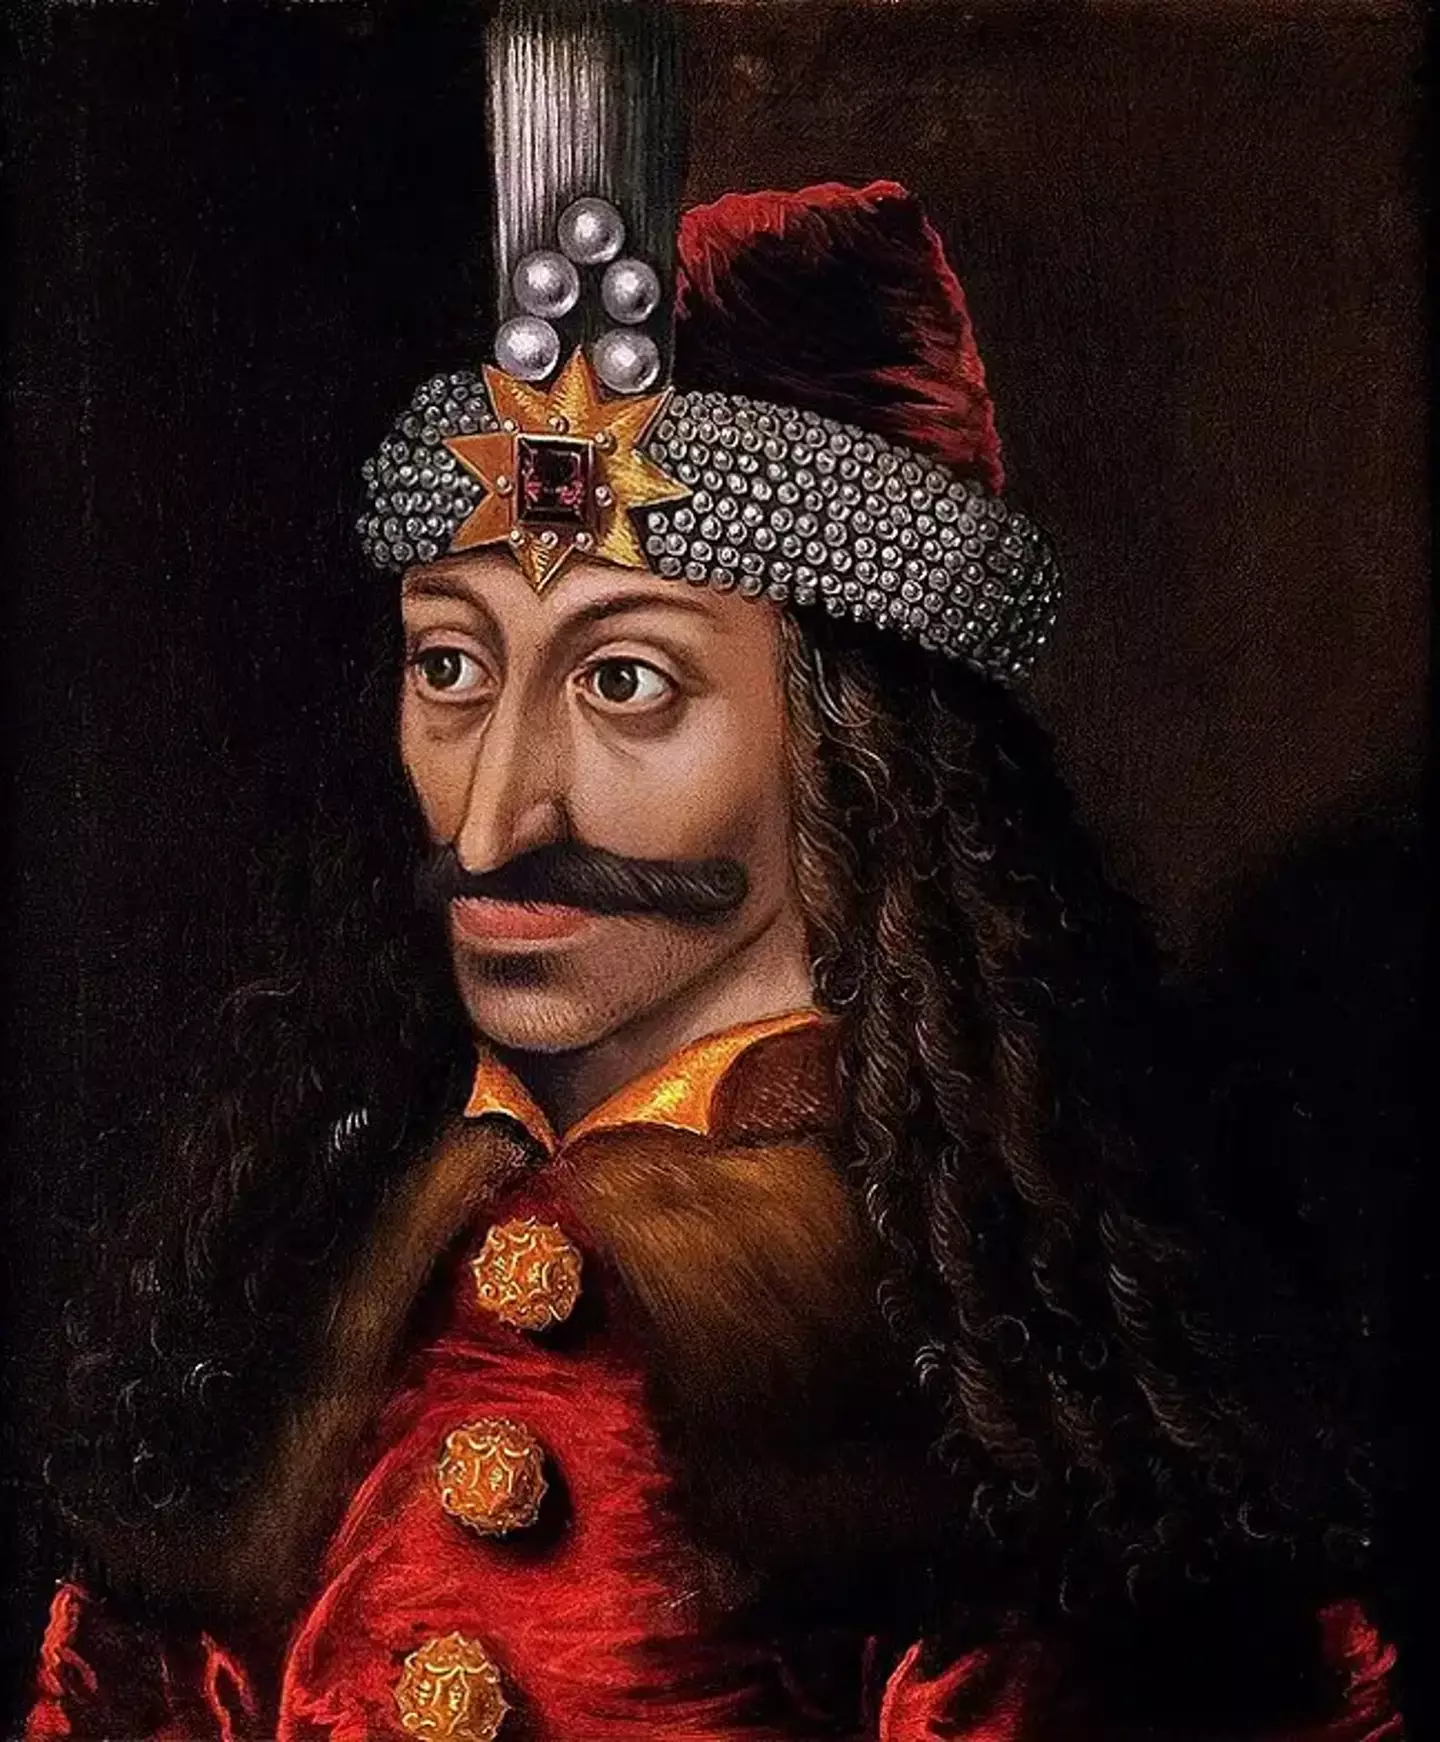 Vlad the Impaler had a thirst for blood.